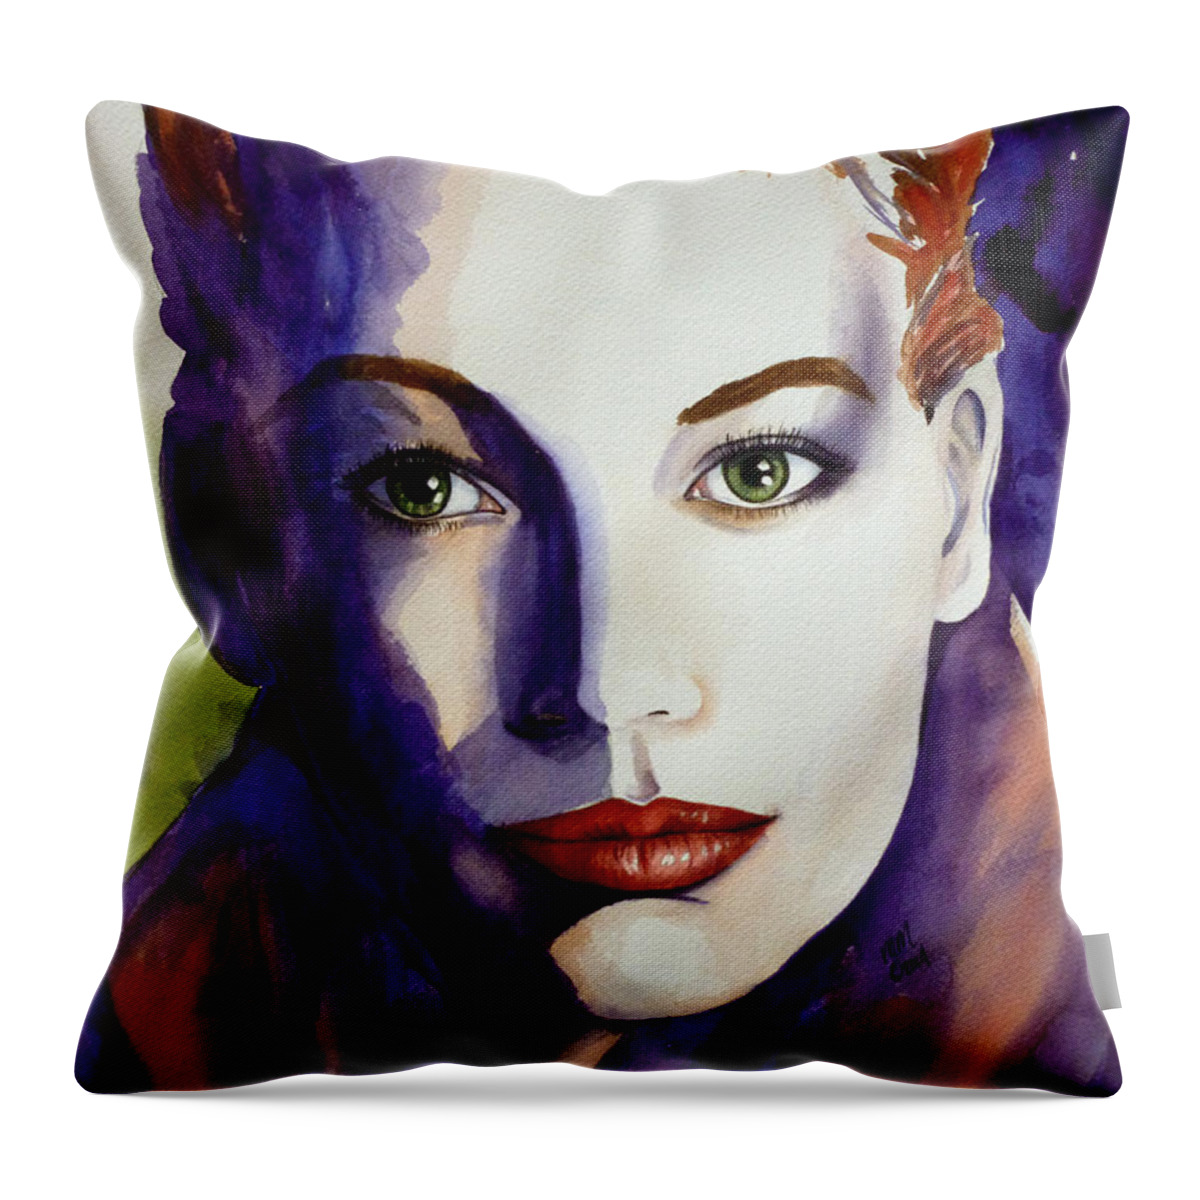 Abstract Realism Throw Pillow featuring the painting Determined by Michal Madison